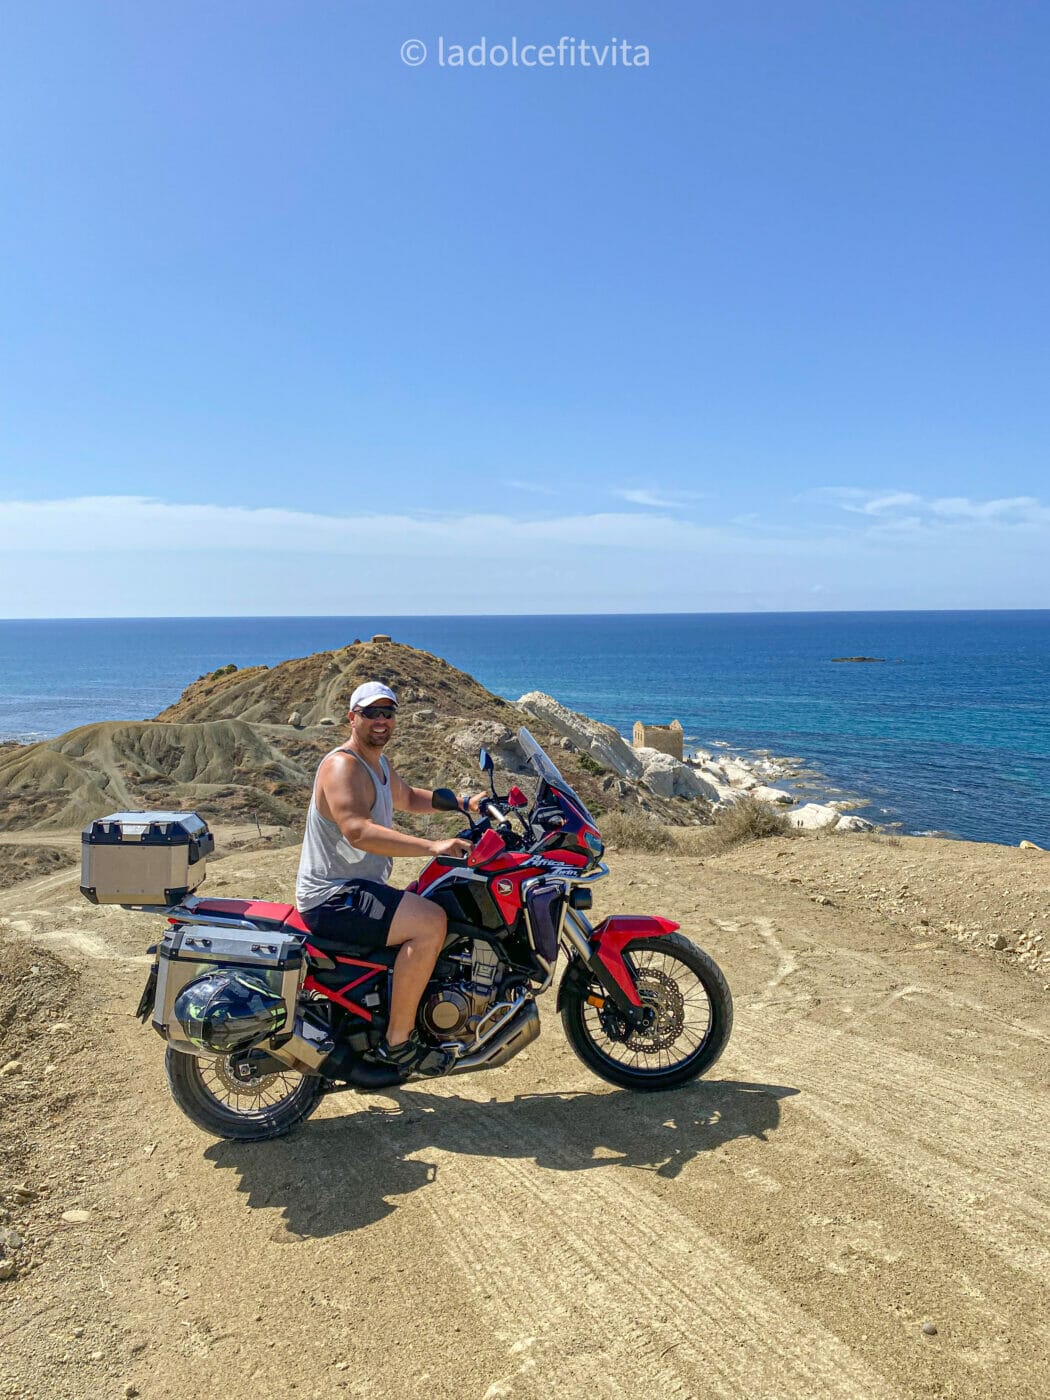 man on motorcycle on a dirt road on a cliffside towering over the Mediterranean sea